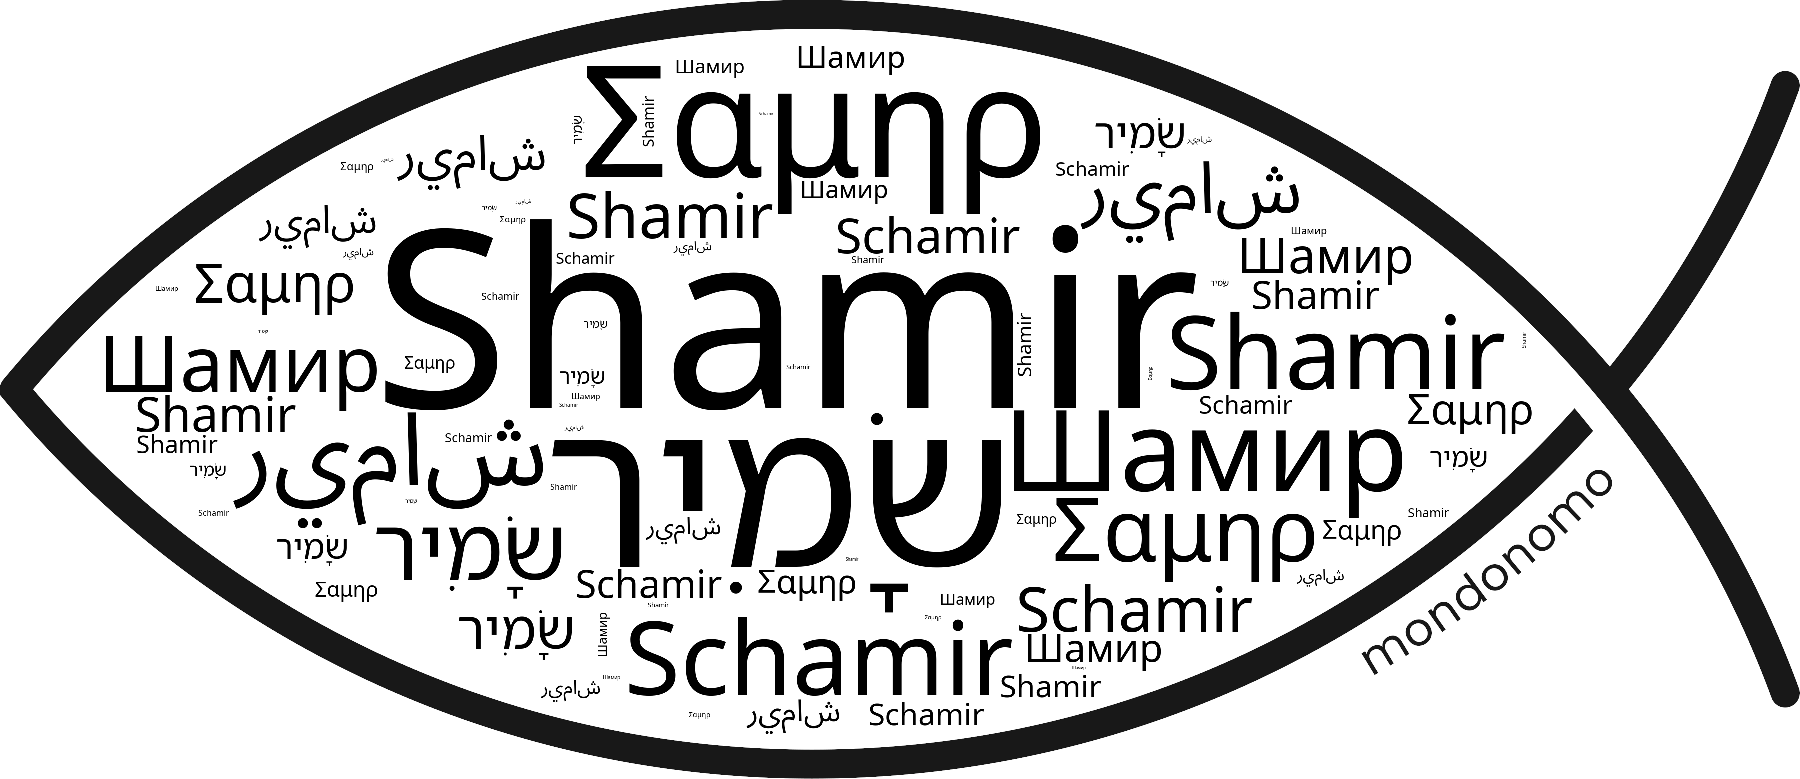 Name Shamir in the world's Bibles